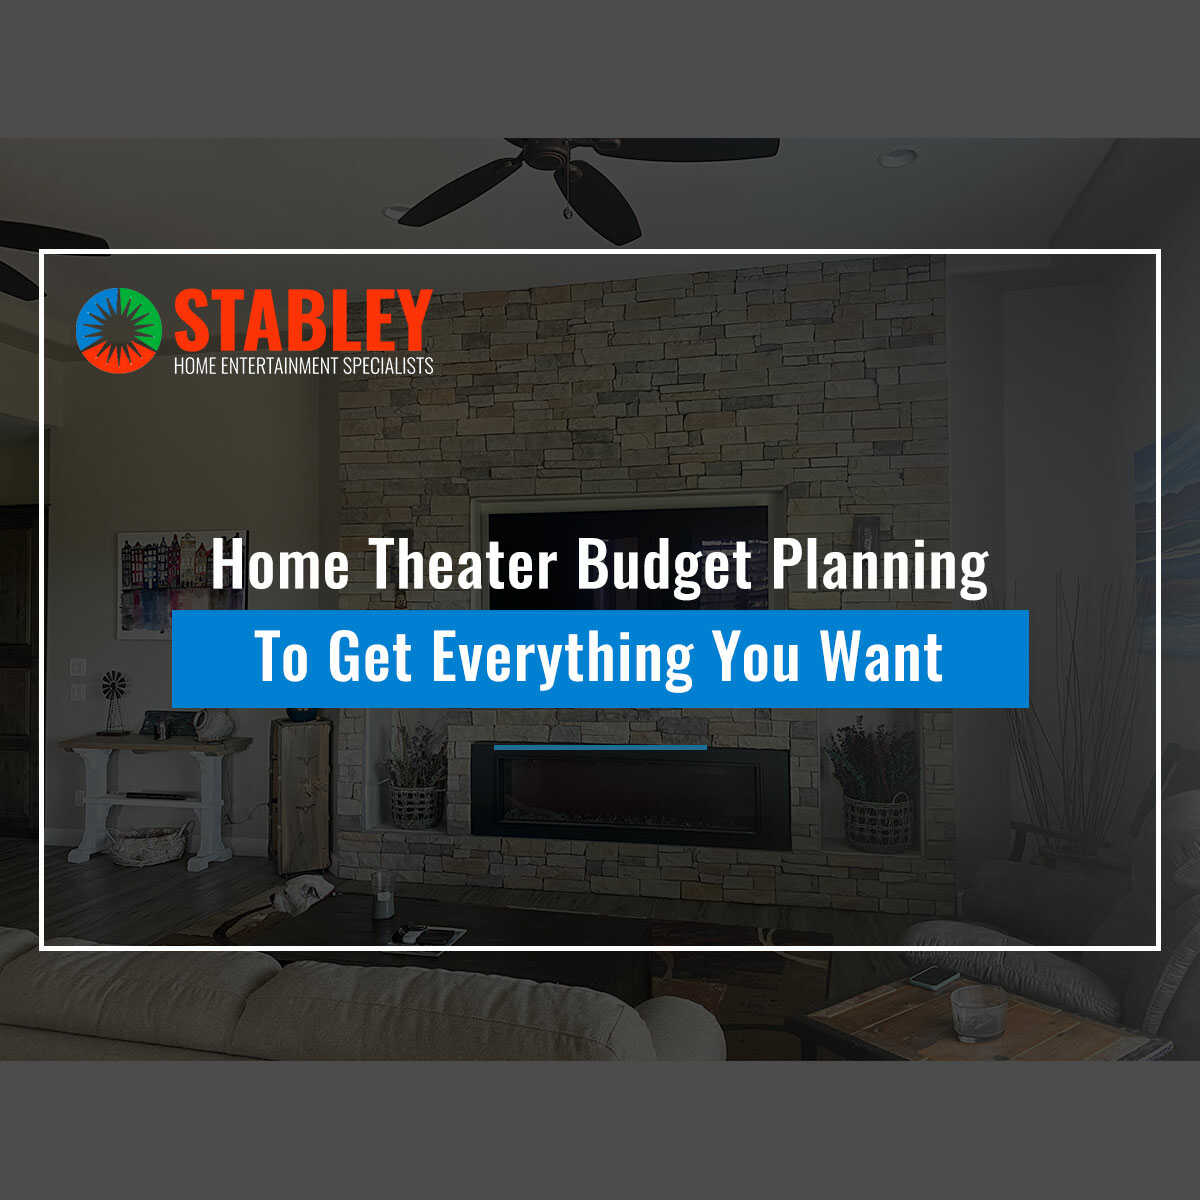 Home Theater Budget Planning To Get Everything You Want